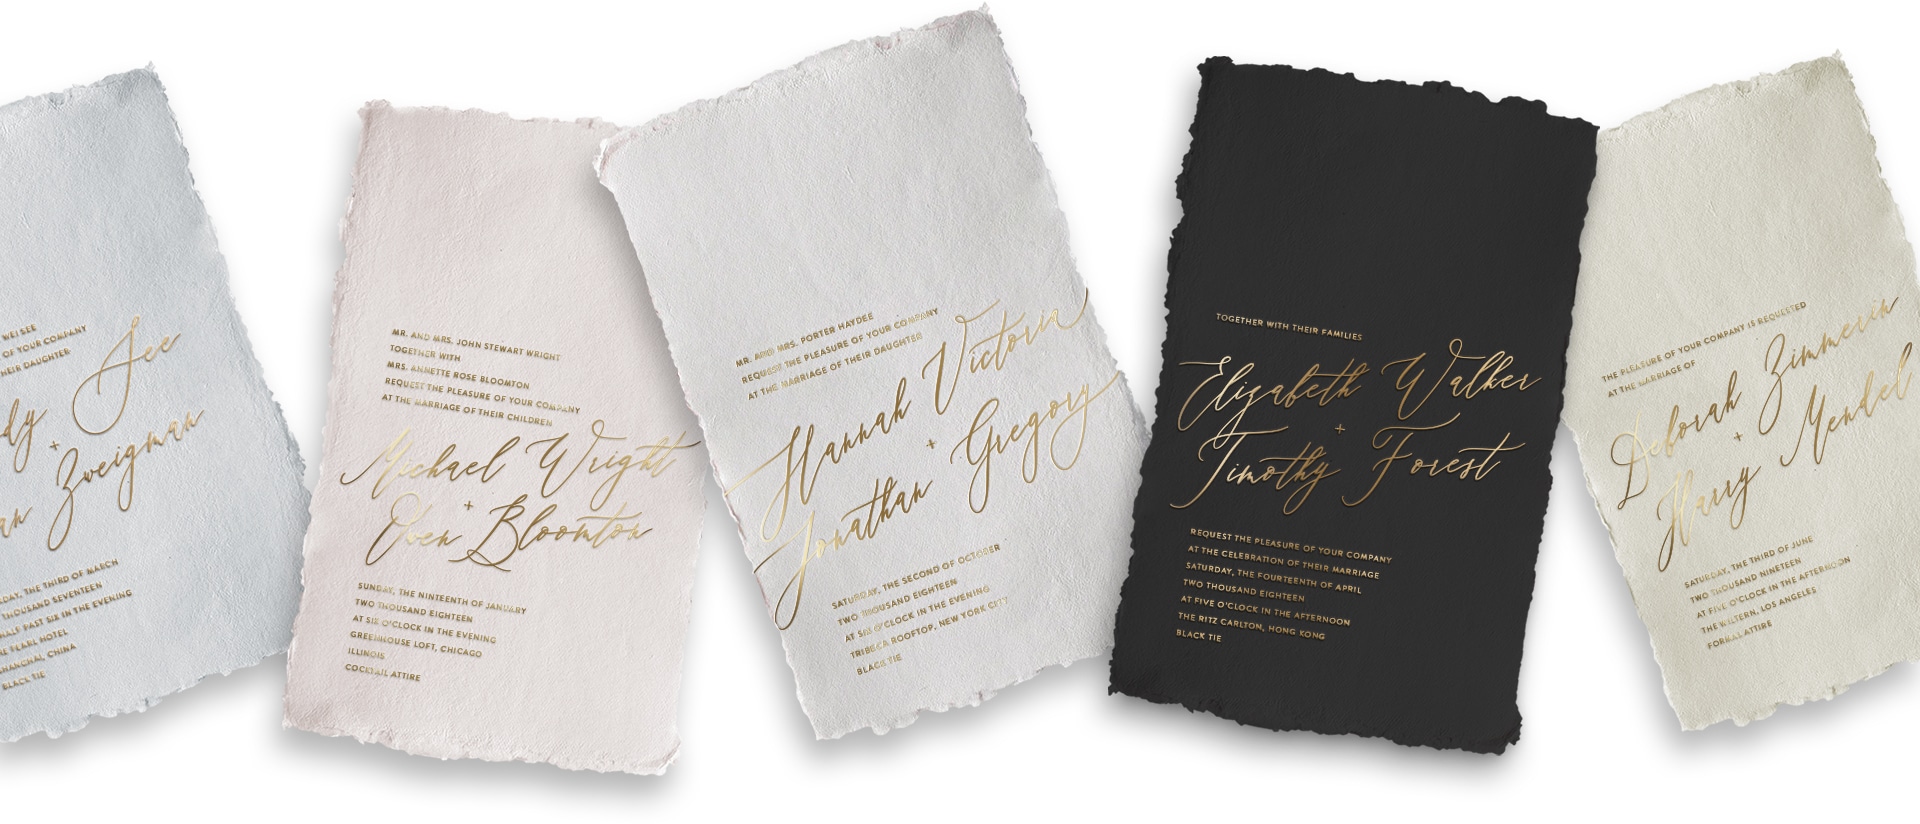 Invitations on different paper colors